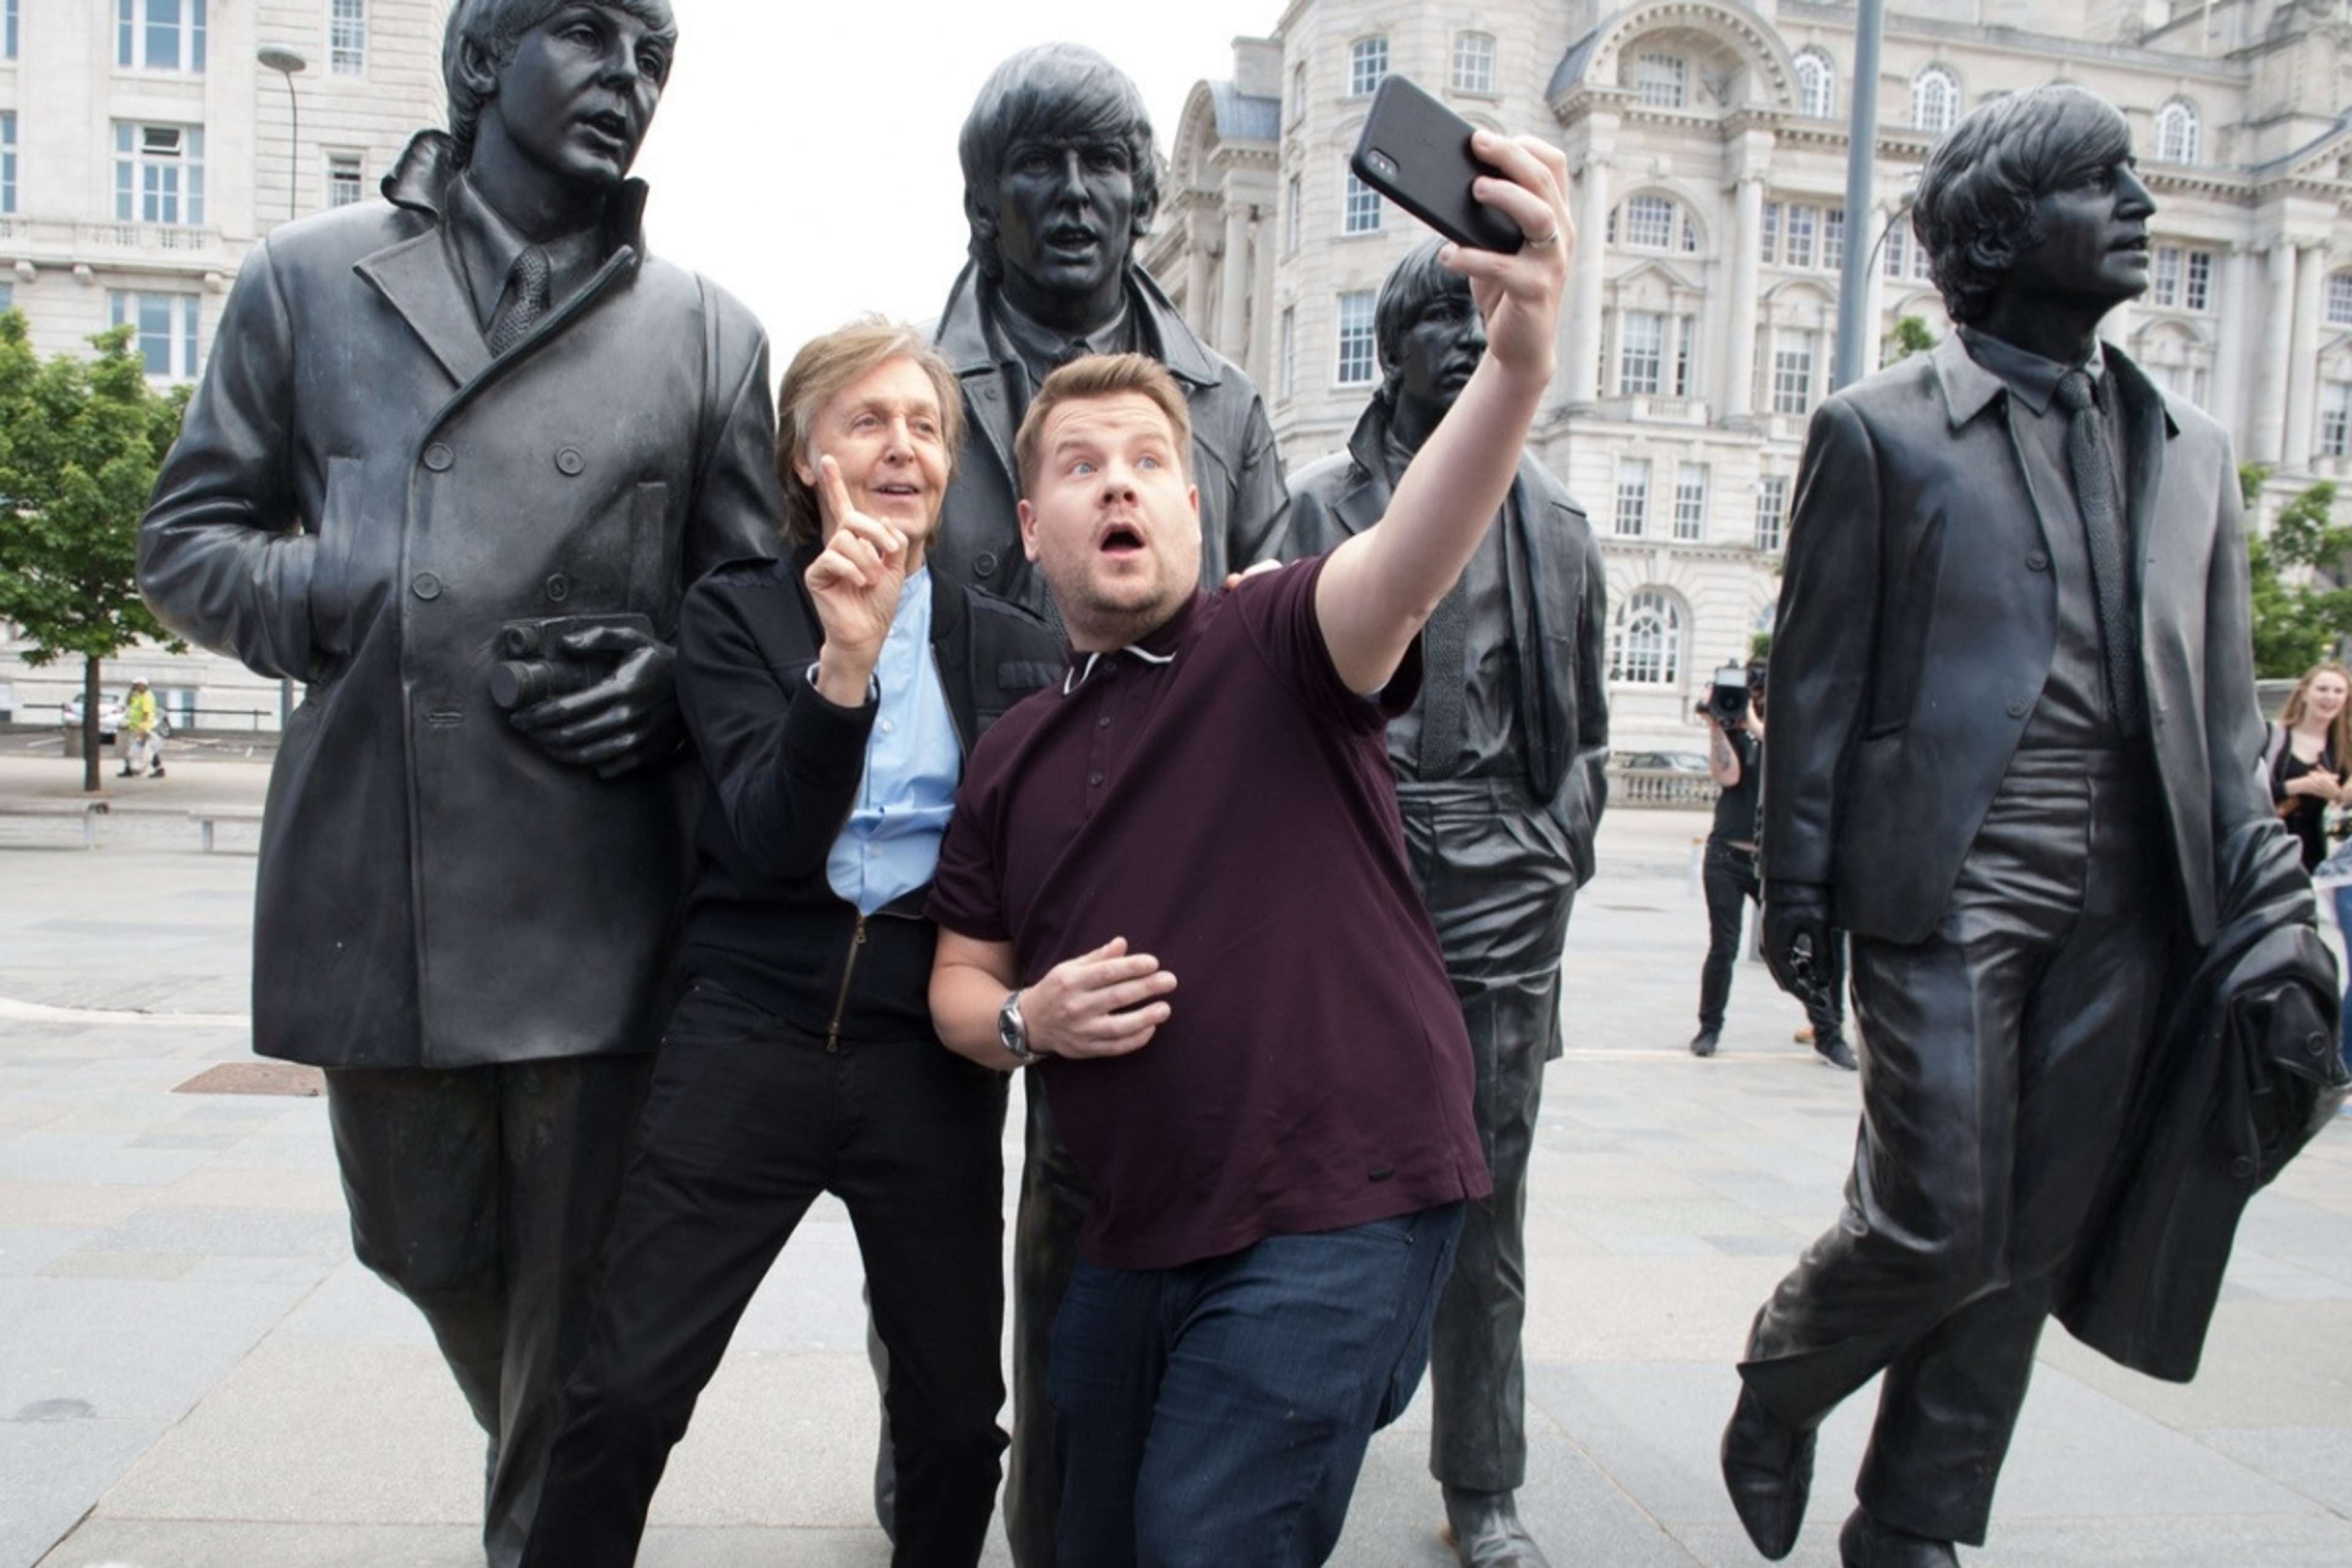 In June Paul took James Corden back to his hometown of Liverpool in a special episode of Carpool Karaoke. This became the #1 trending YouTube video of the year in the UK. 